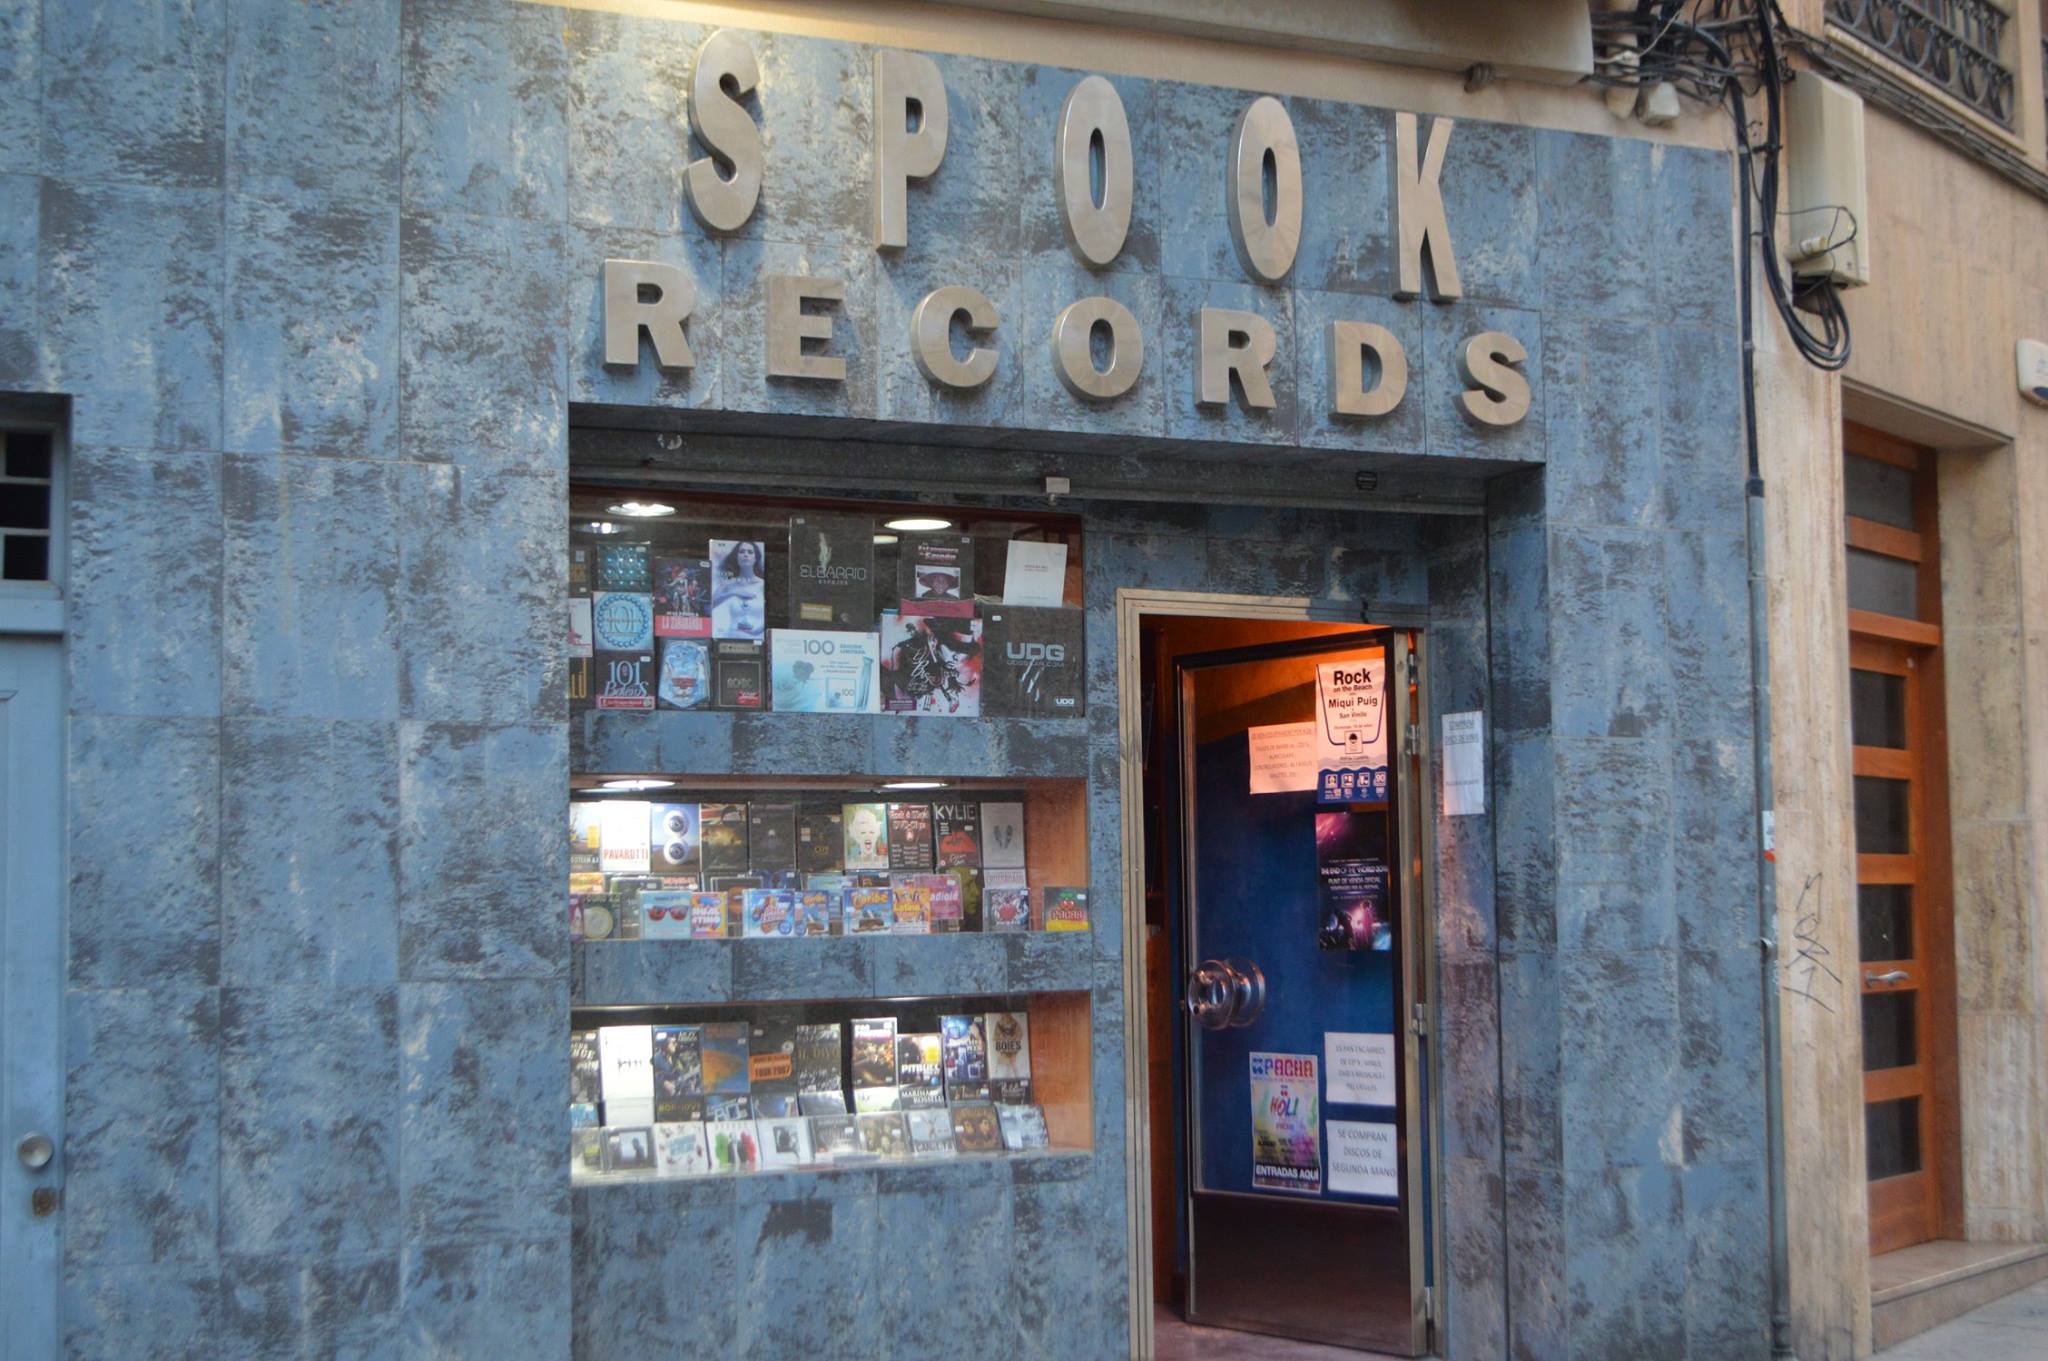 Spook Records - 1 of 1